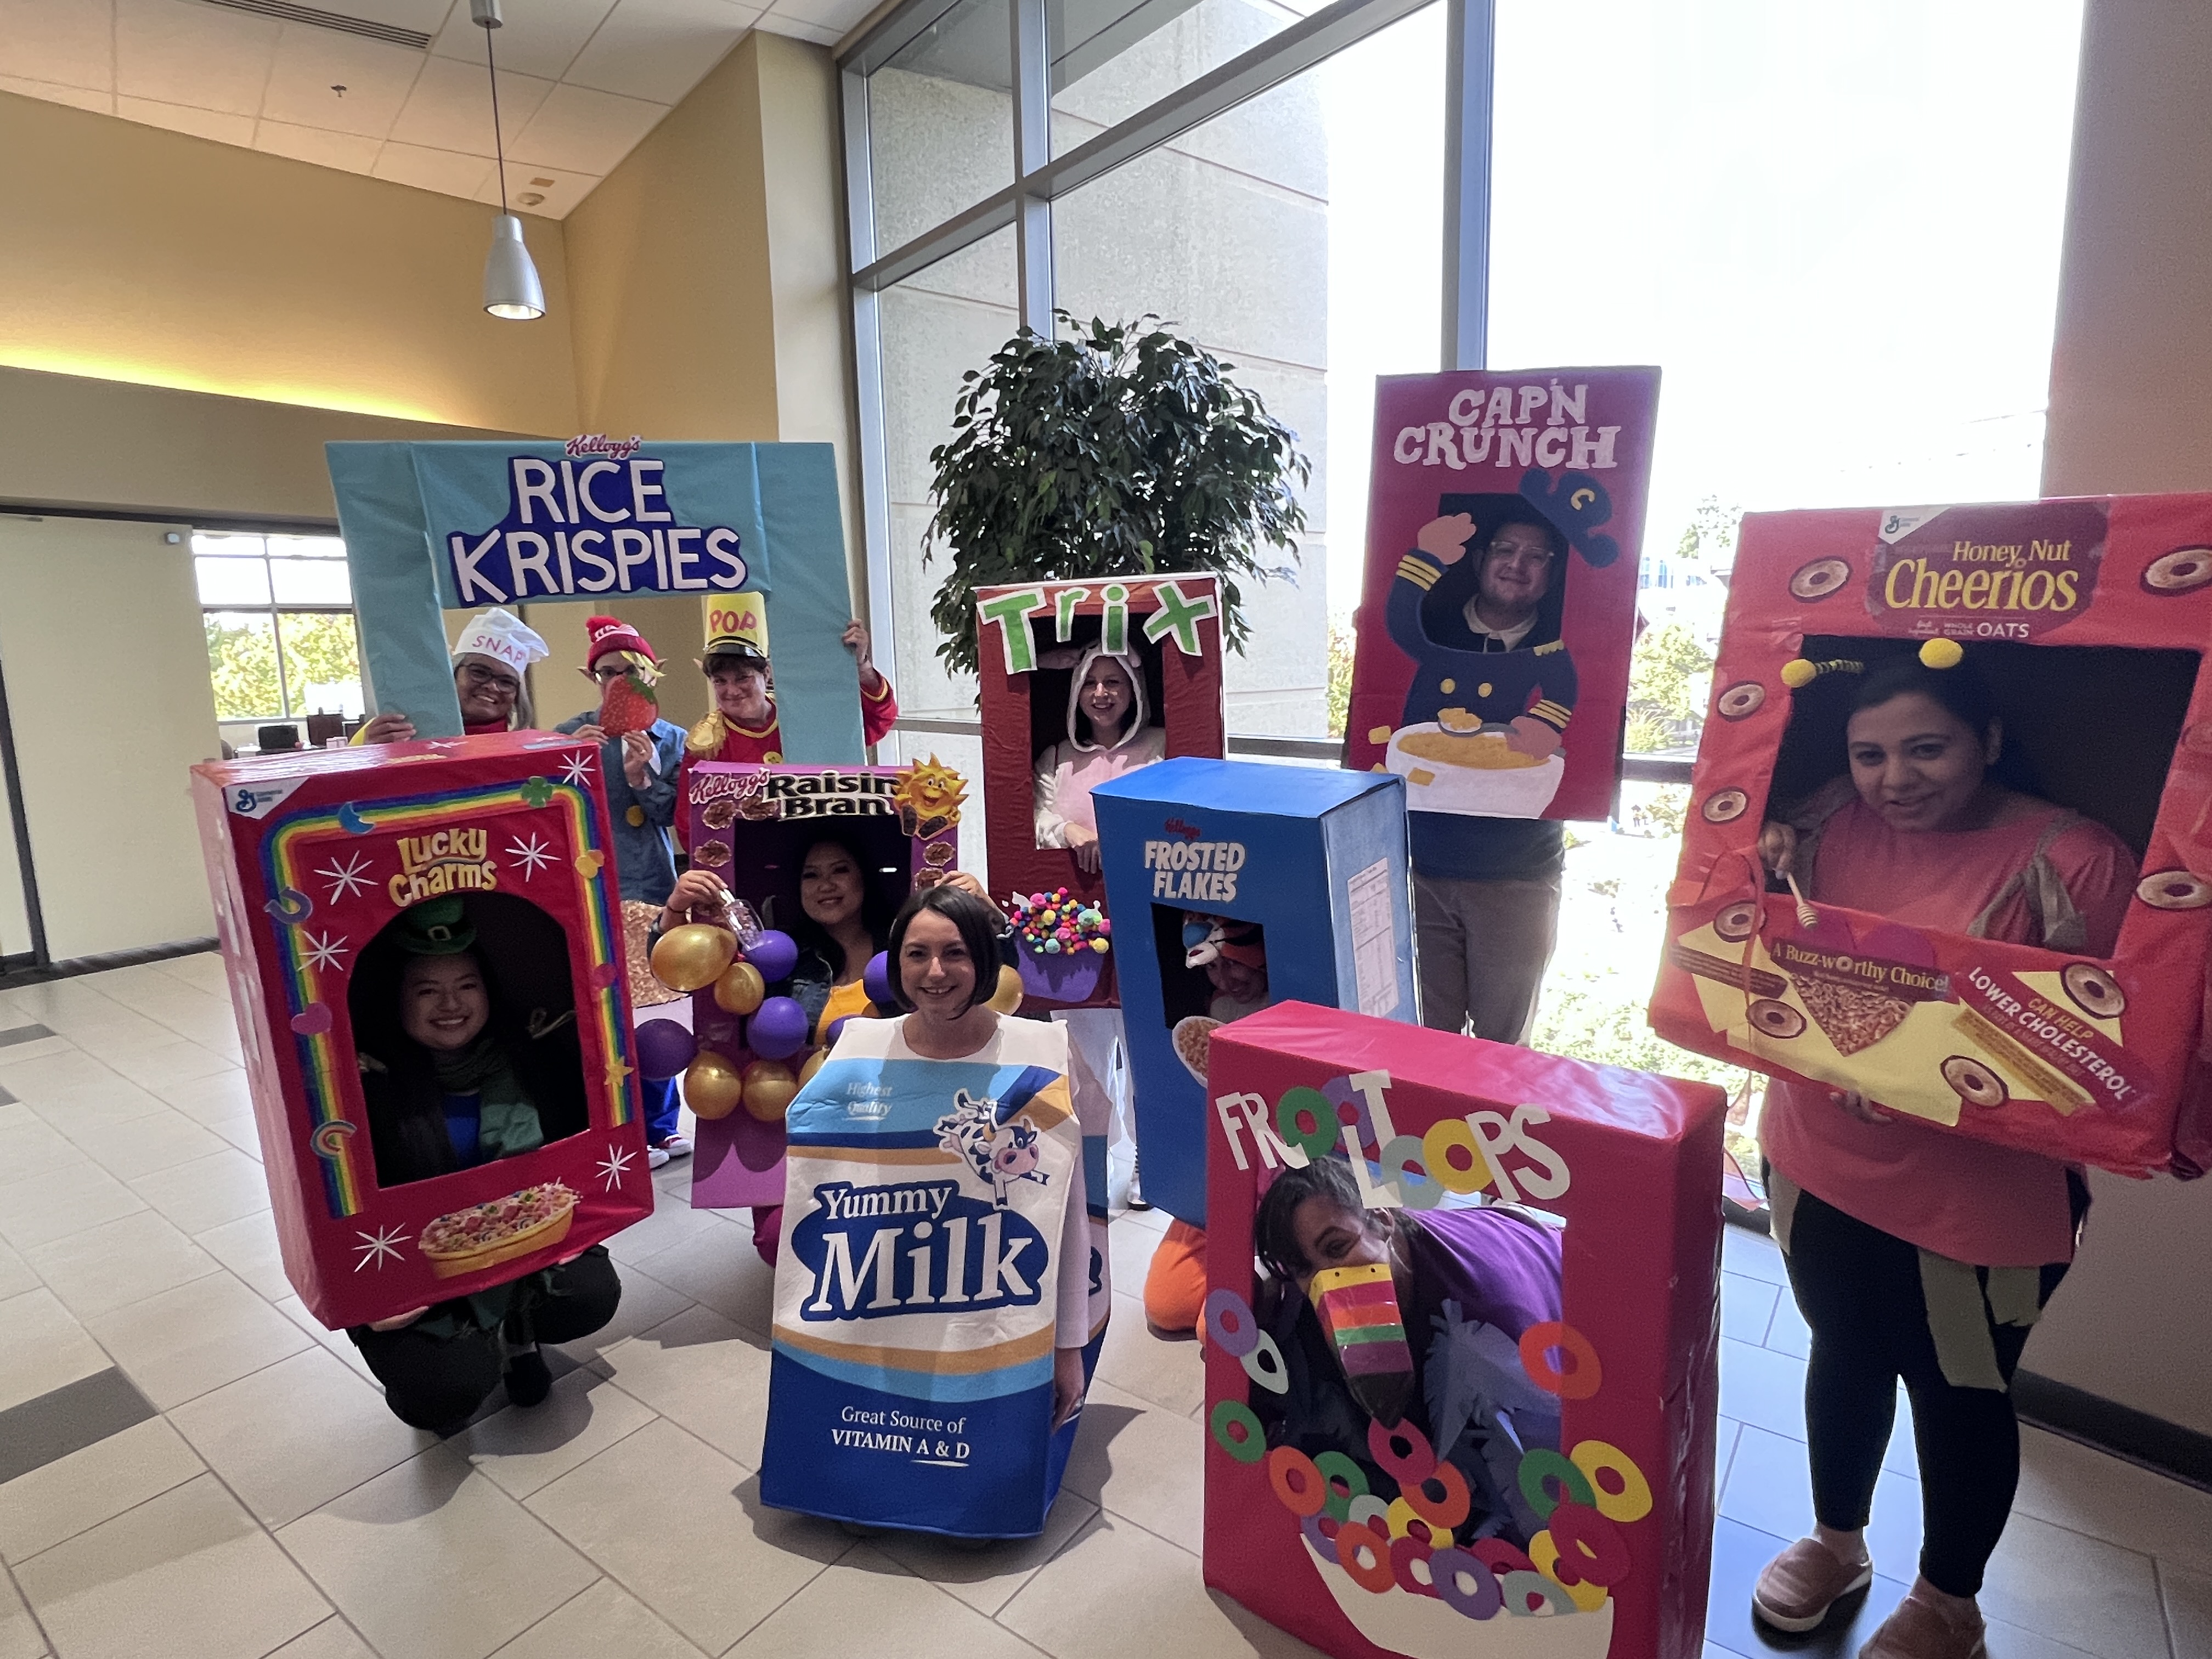 Sponsored Programs Administration – “Milk and Cereal” group dressed in costumes of cereal boxes and caron of milk inside building lobby area